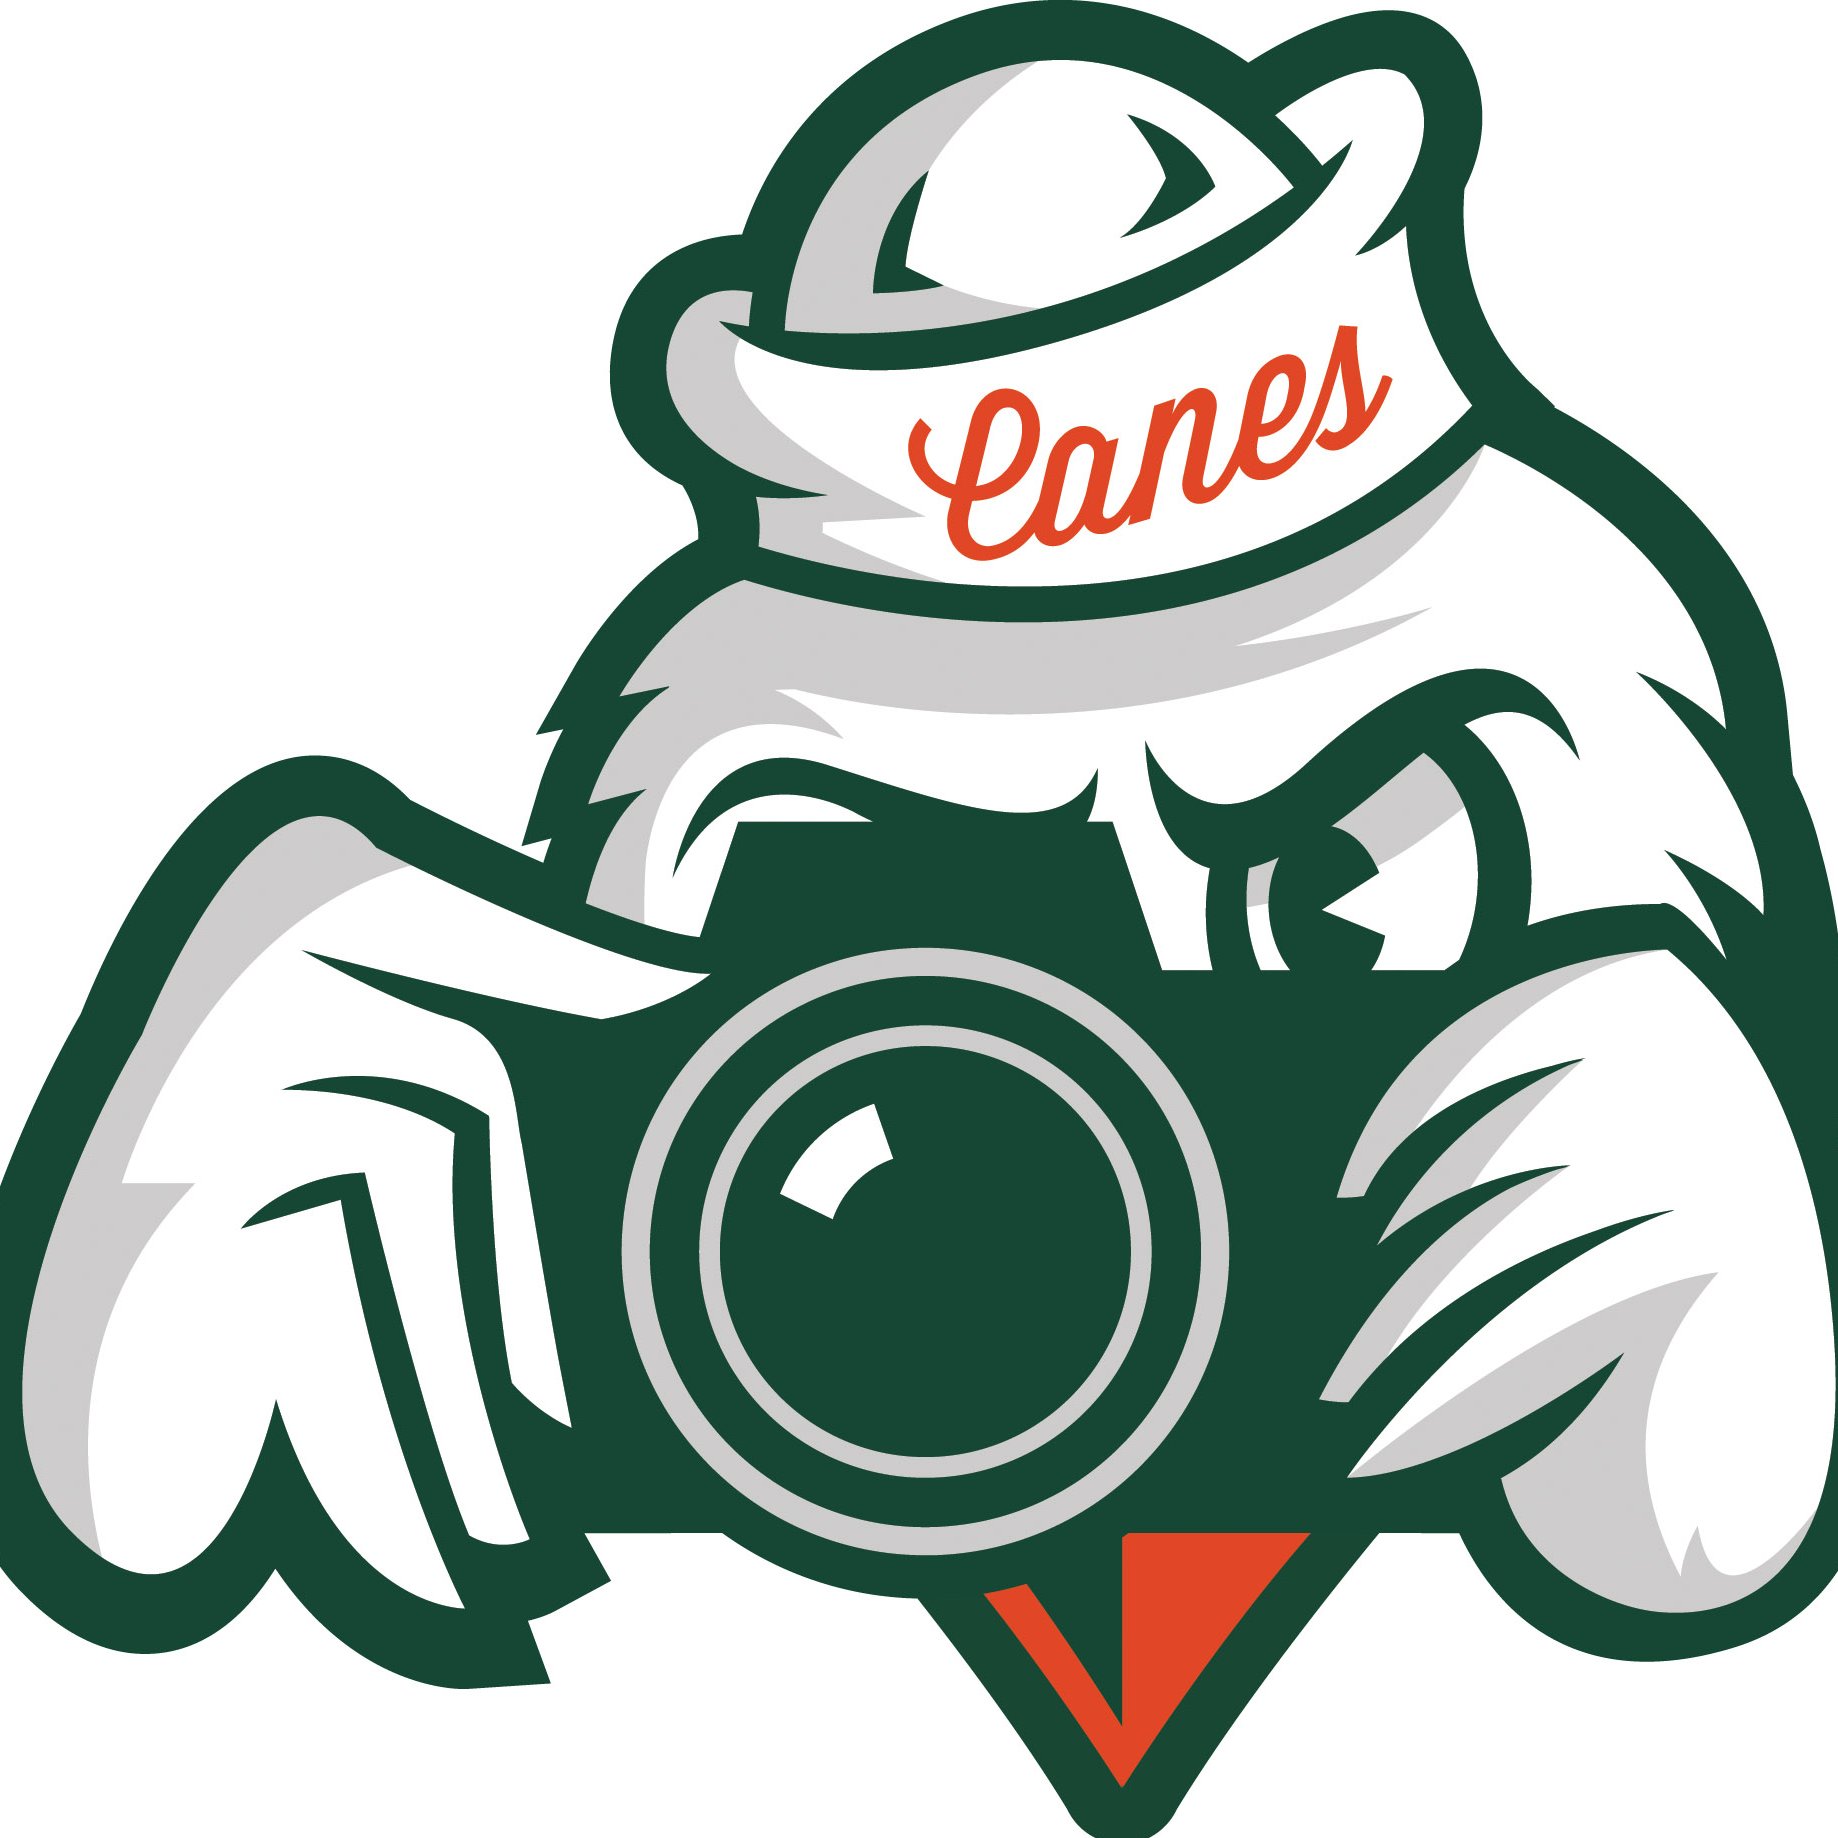 Official account of the Photography Team for Miami Athletics. All images protected by copyright law. No re-post without credit. GO CANES!